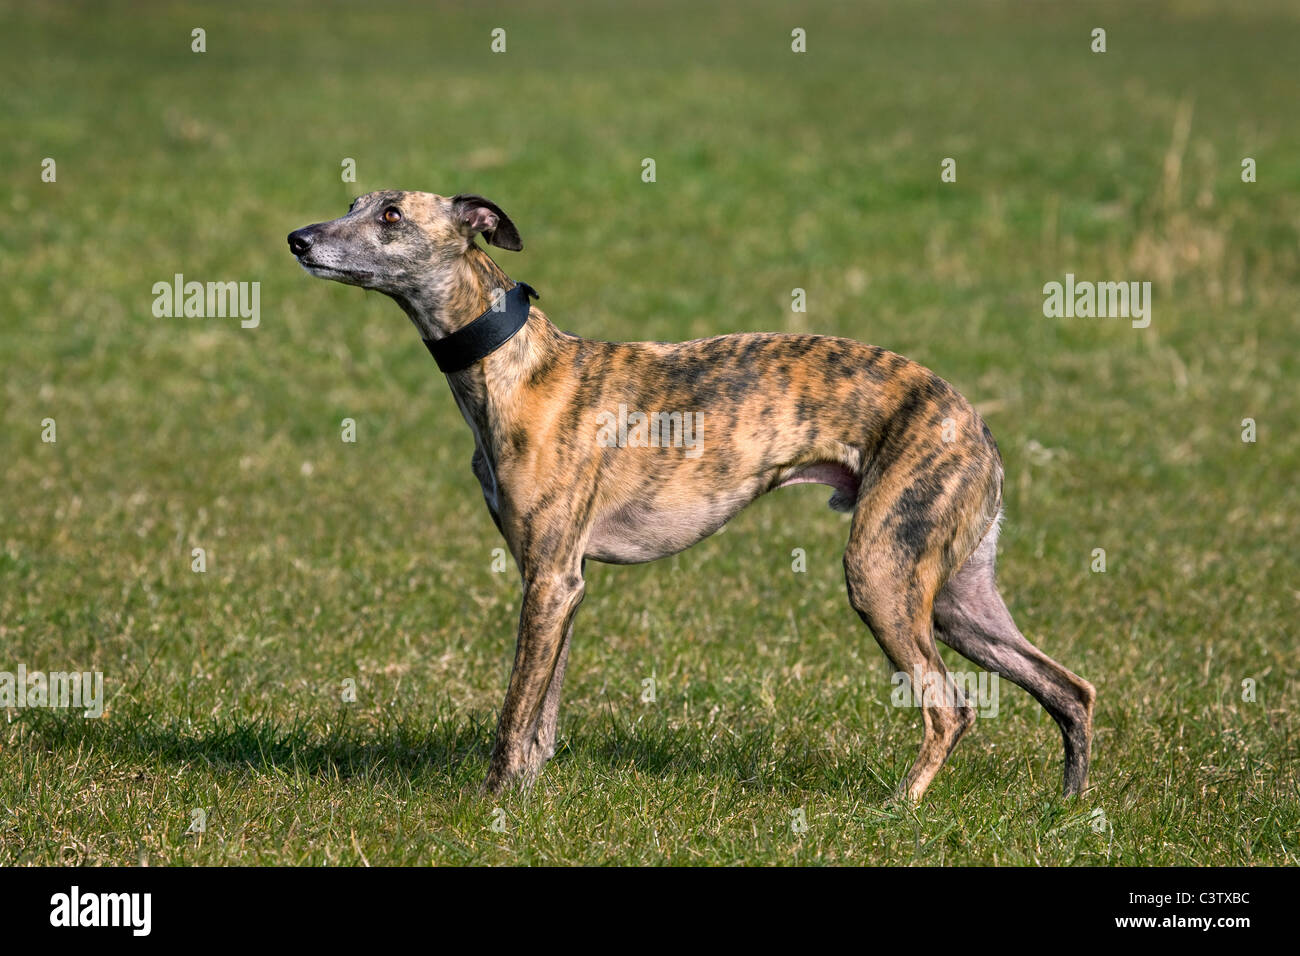 Whippet (Canis lupus familiaris) in garden Stock Photo